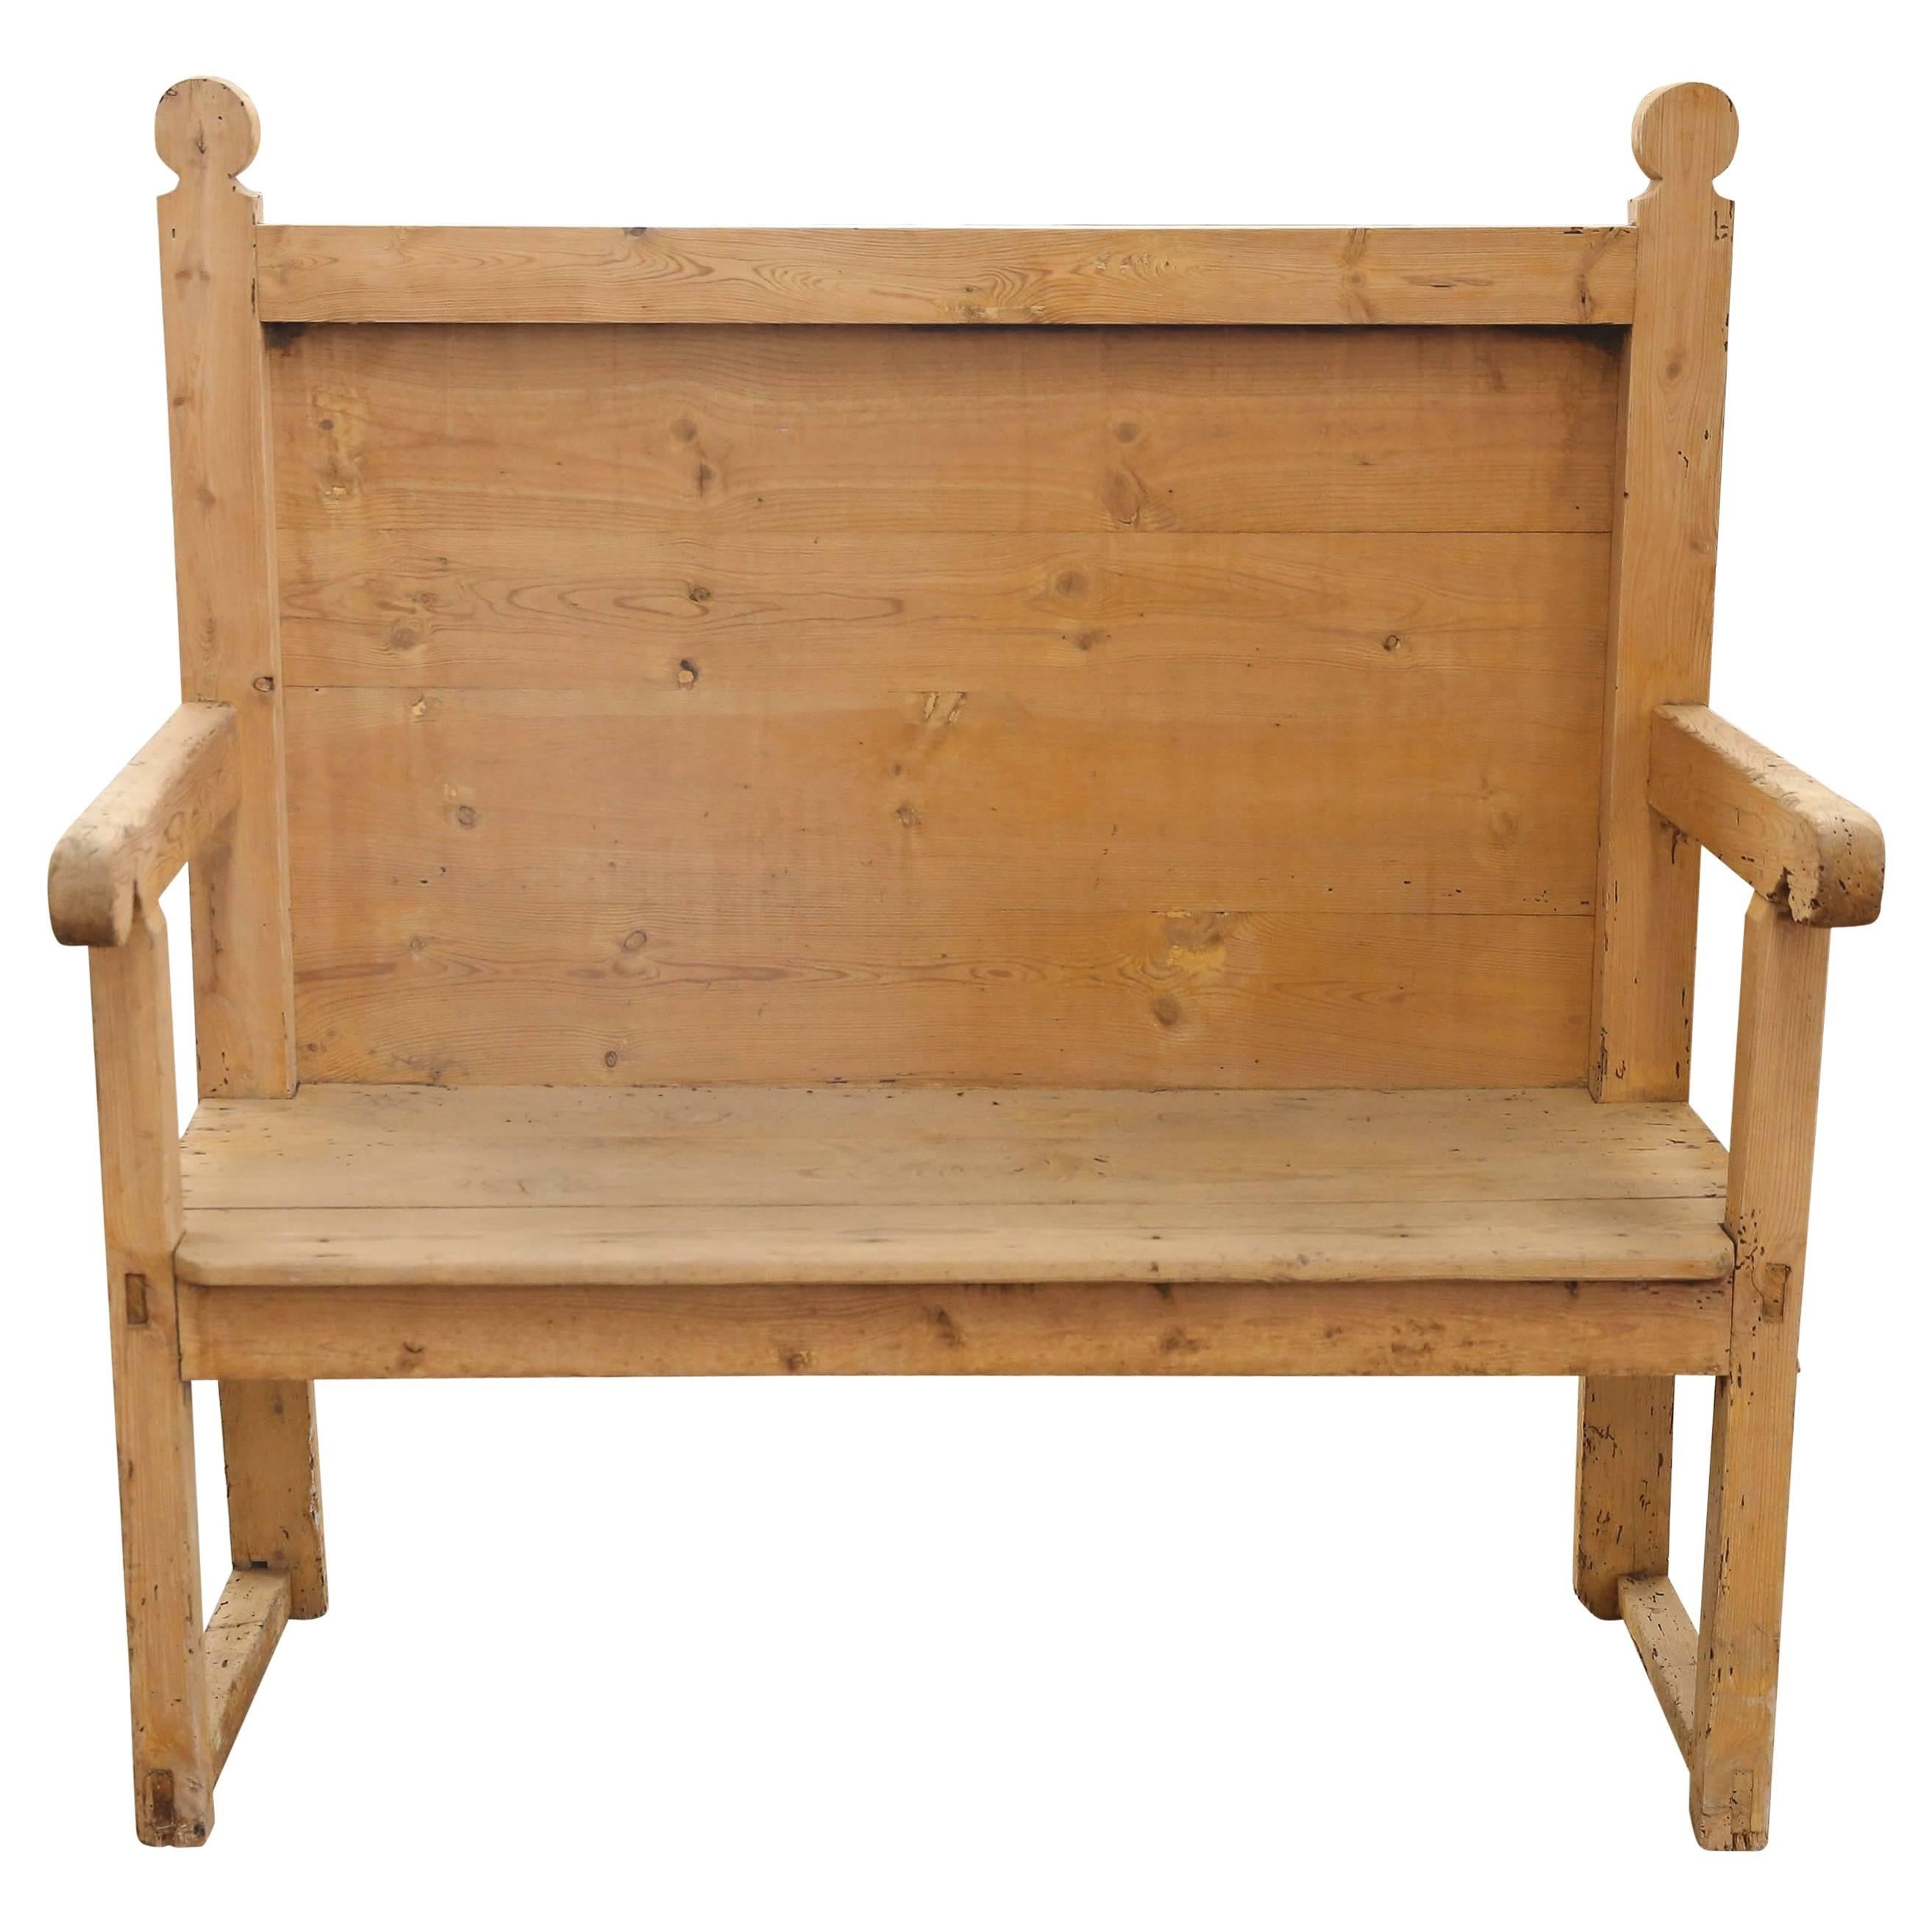 19th Century Pine Bench from Spain